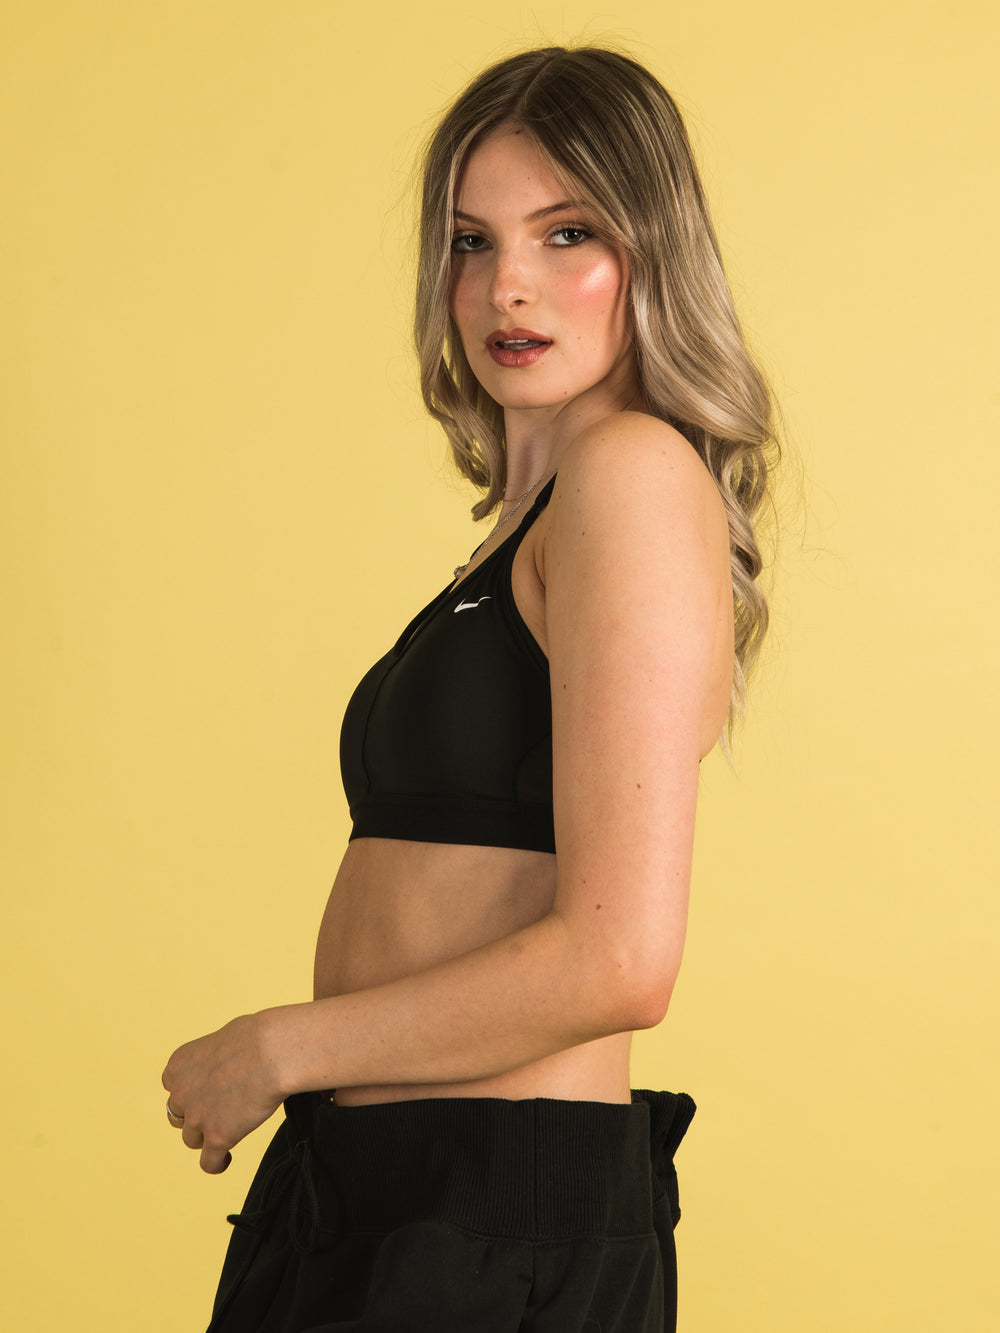 Nike Dri Fit Indy Sports Bra - Get Best Price from Manufacturers